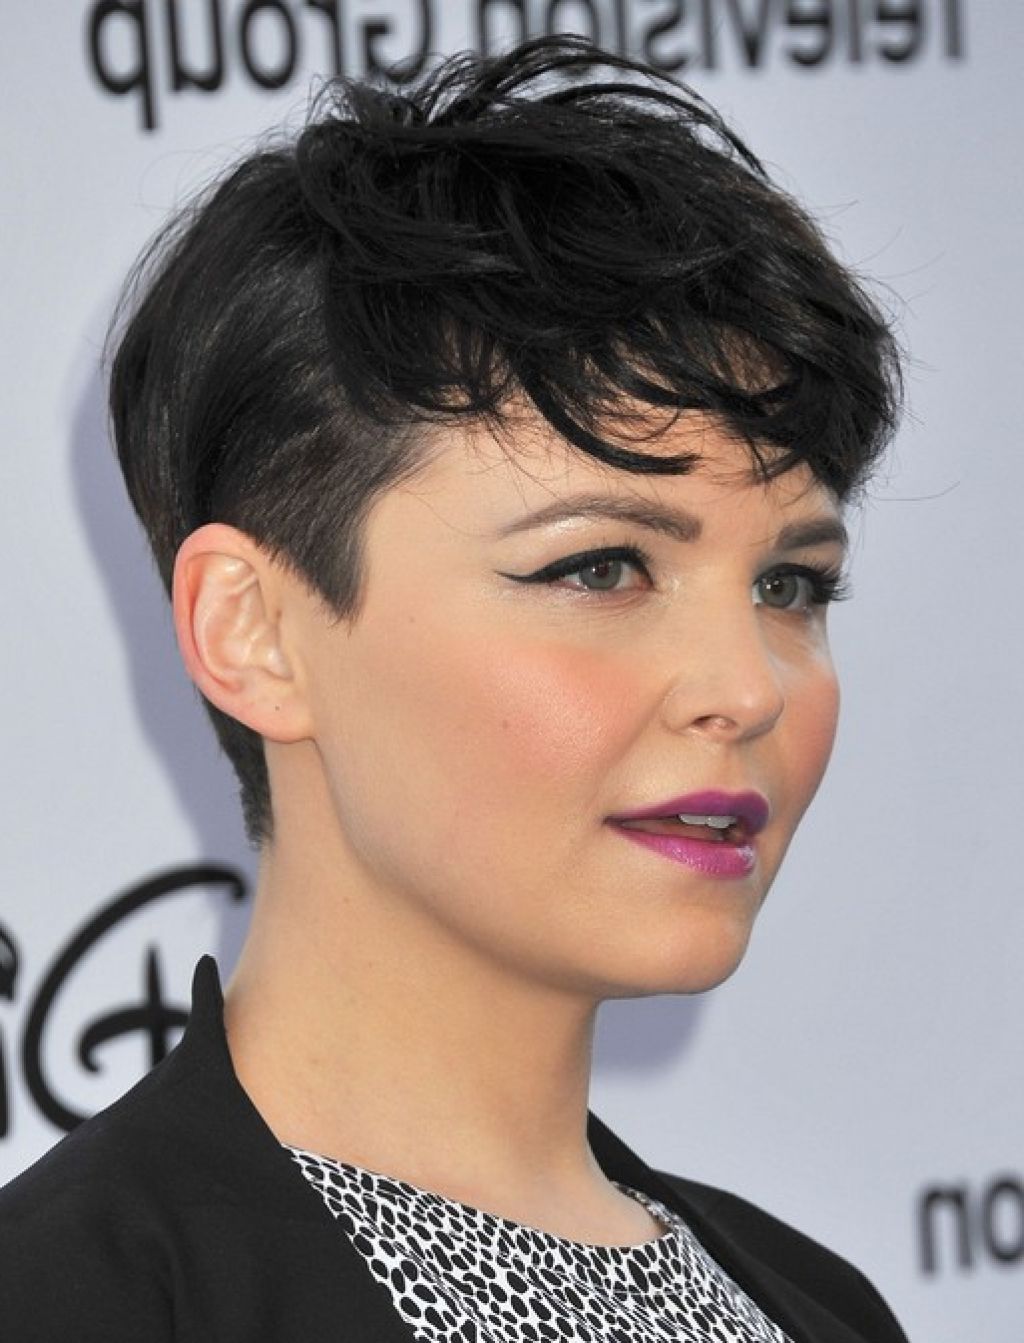 14 Most Beautiful Short Curly Hairstyles and Haircuts For ...